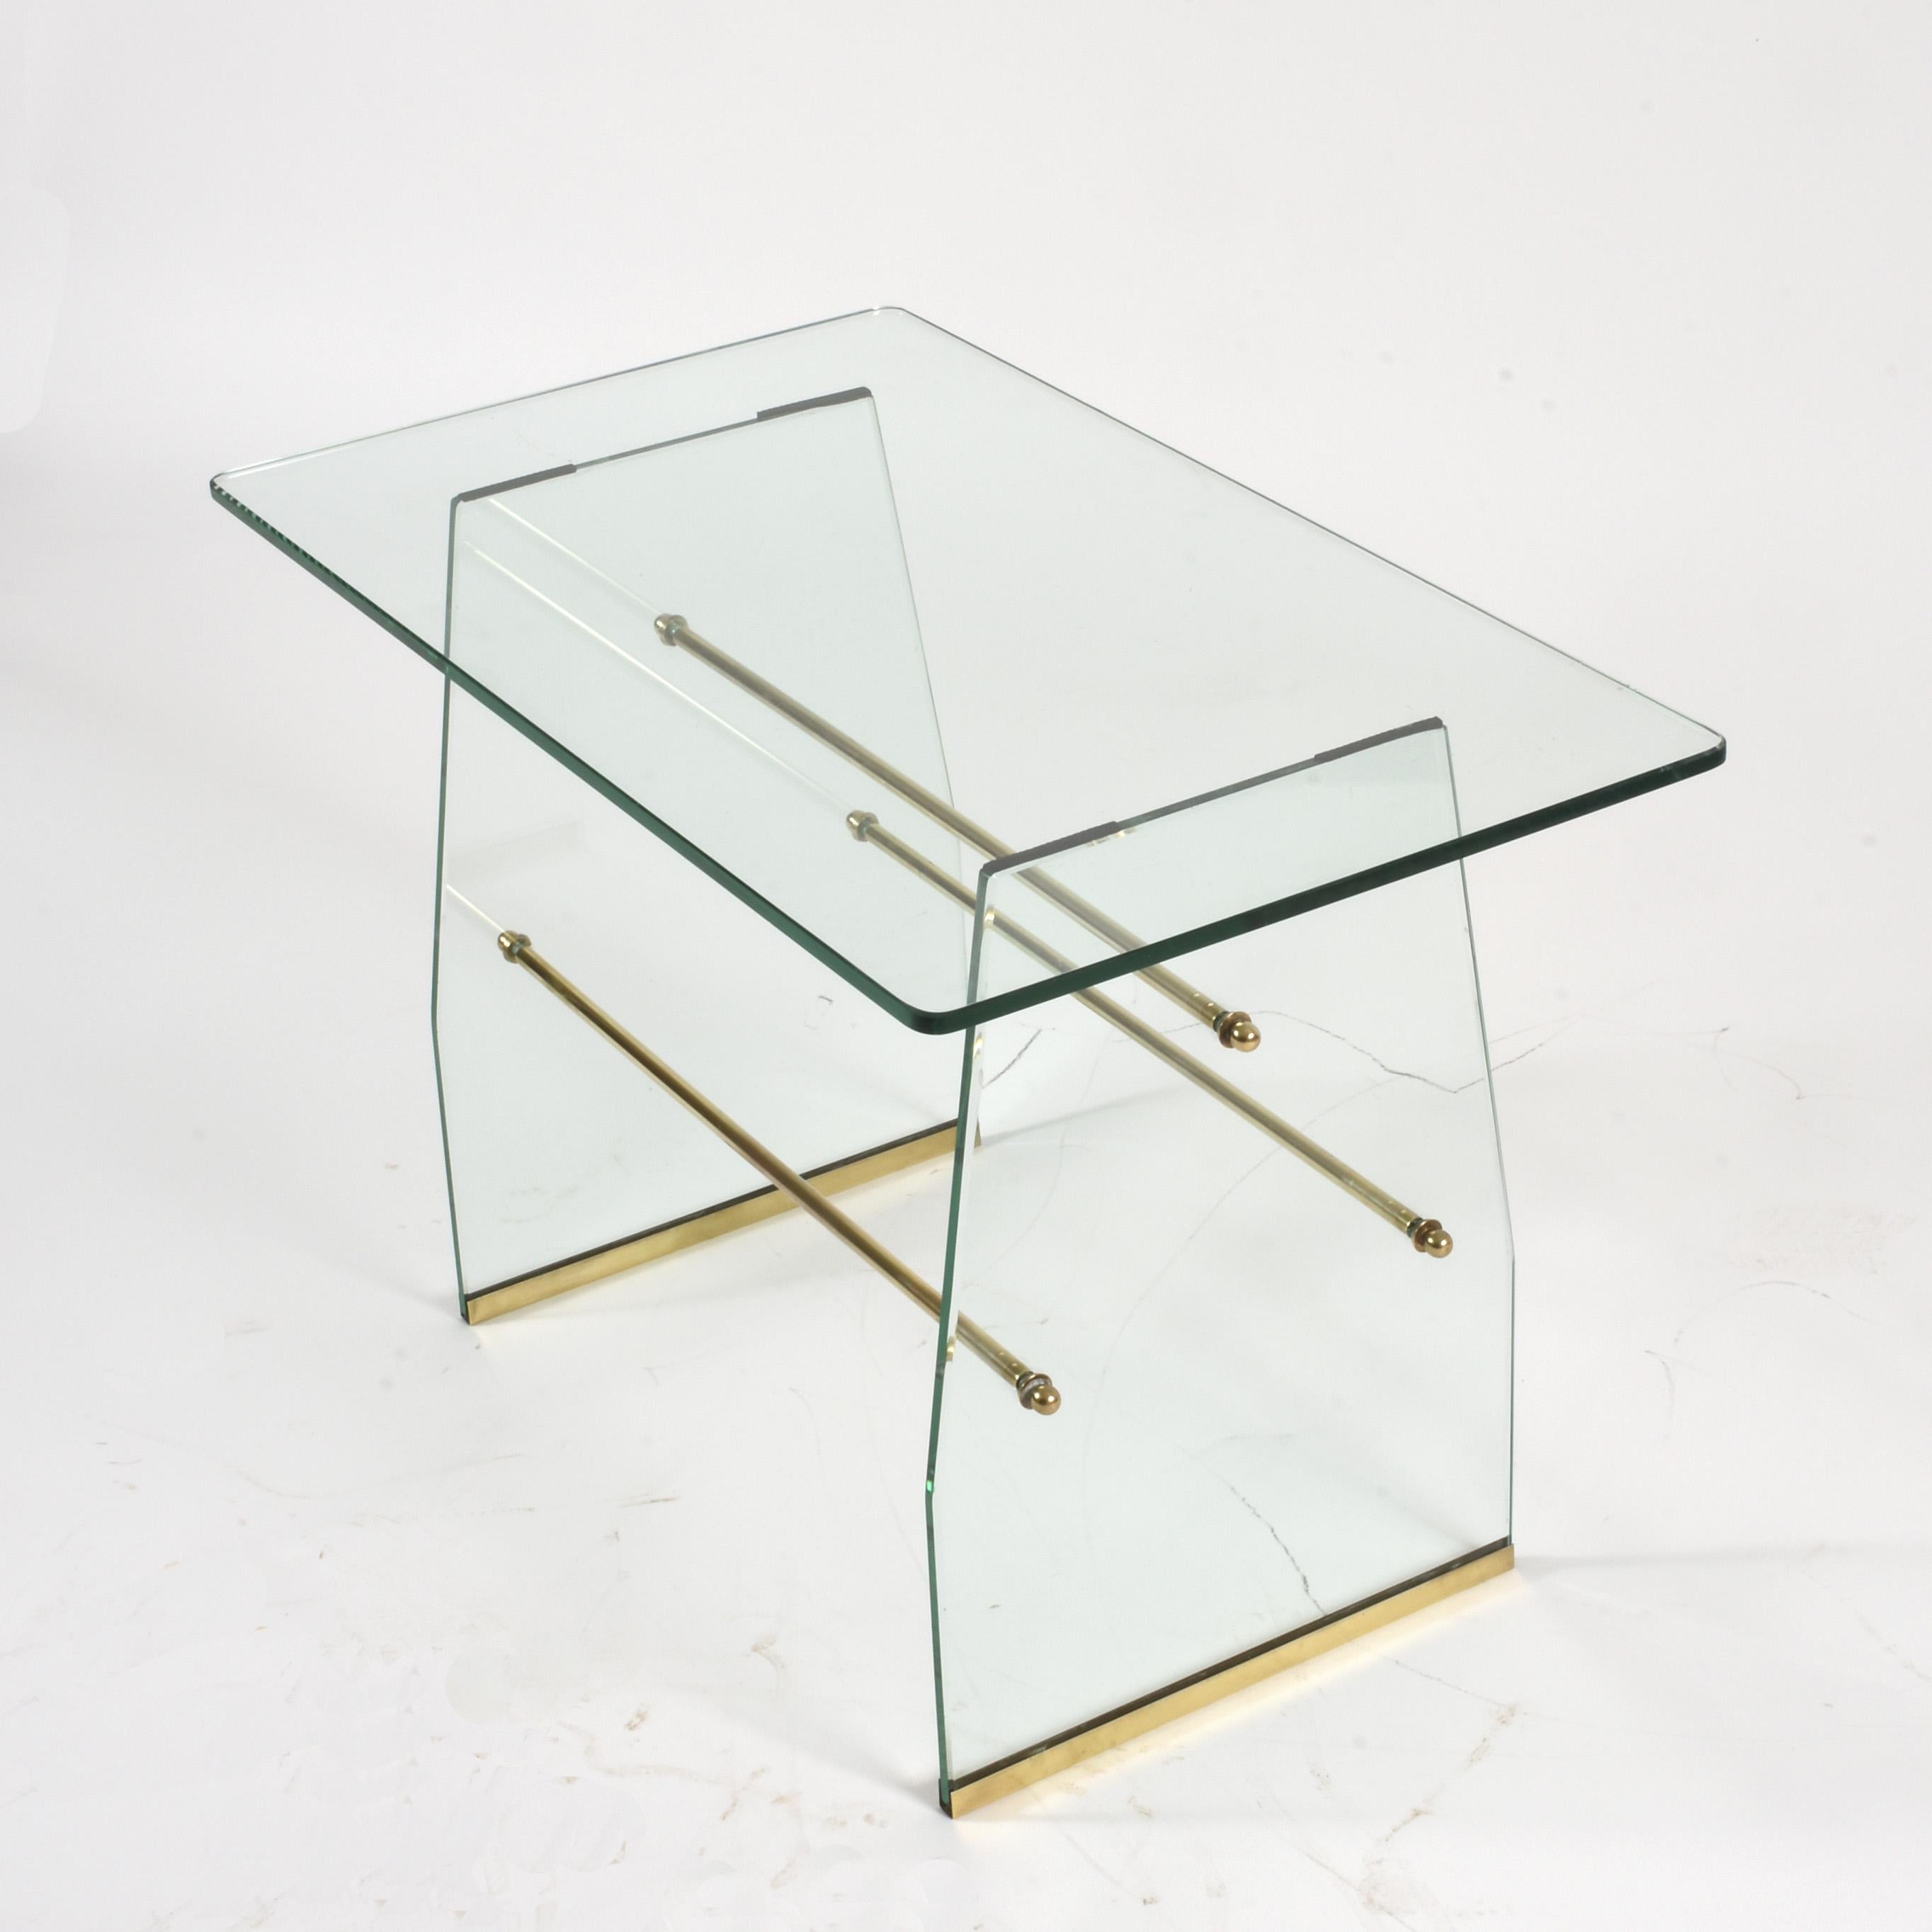 Extraordinary and extremely rare table attributed to Pietro Chiesa for Fontana Arte, circa 1935. Solid glass structure with brass base.
Glass with a beautiful shade of green, The base is joined by three brass tubes (easily removable for shipment or